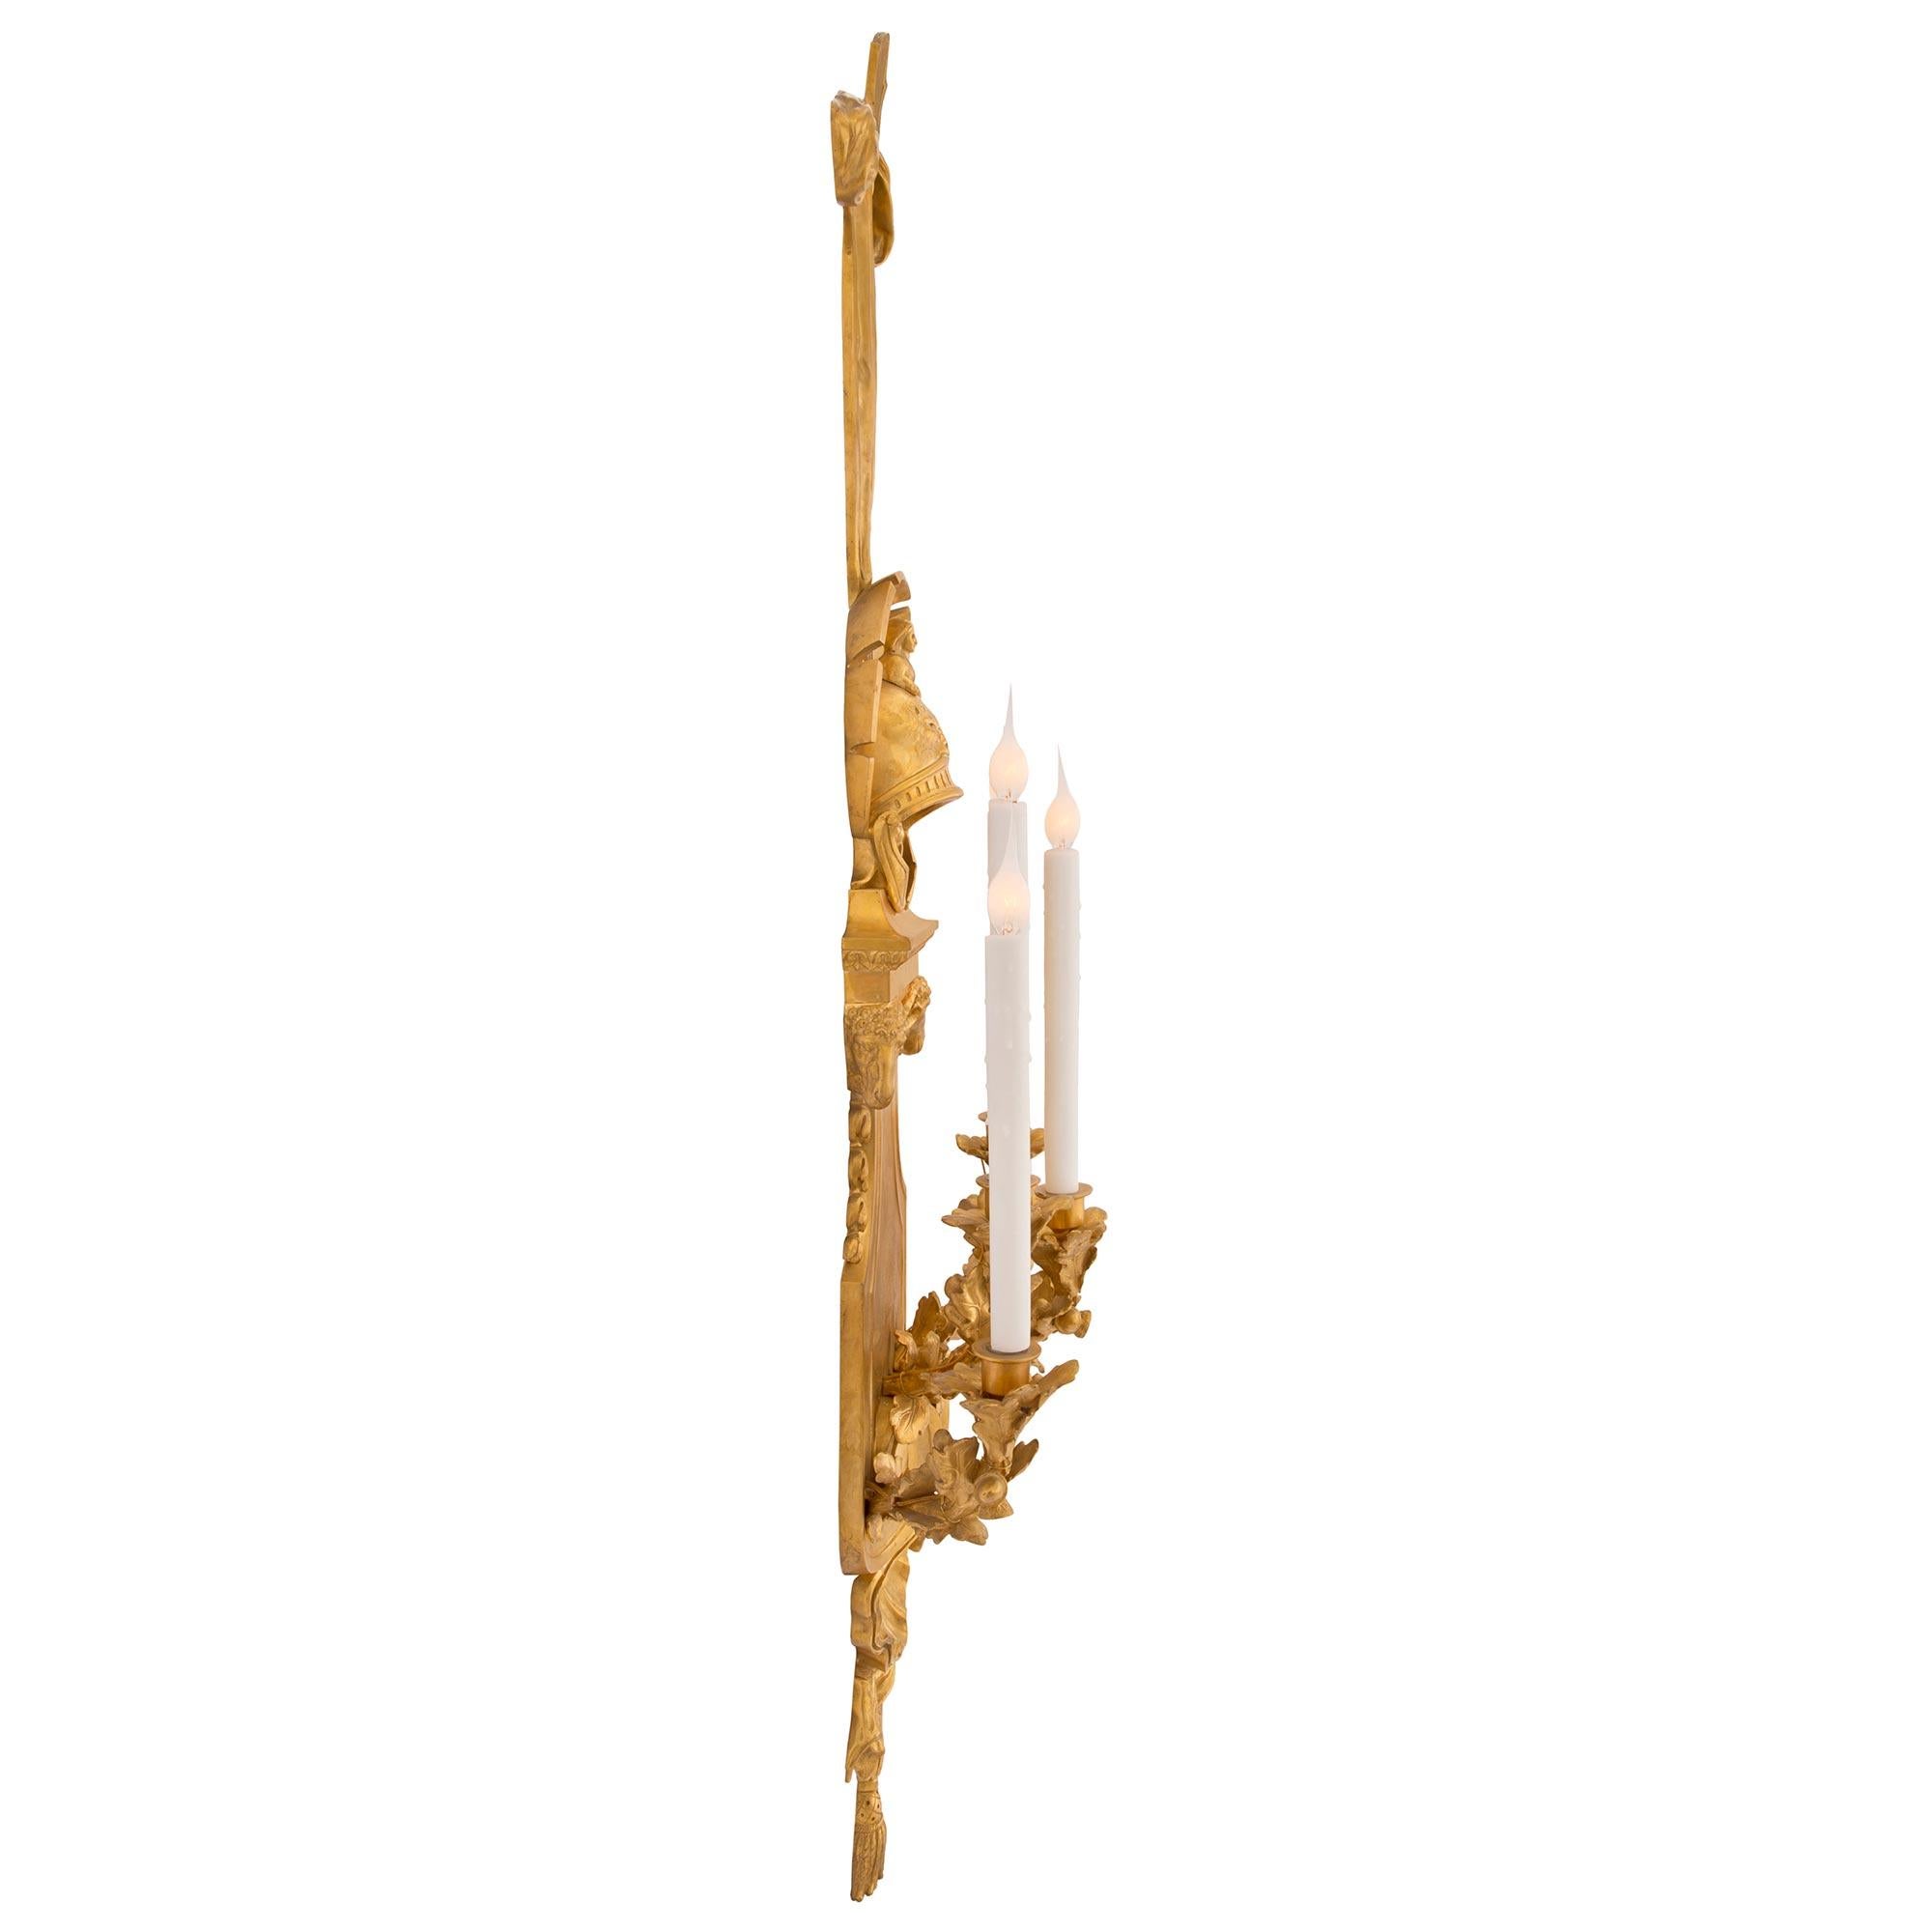 A stunning and most impressive pair of French 19th century Louis XVI st. ormolu sconces. Each large scale five arm sconce is centered by charming tassels at the base below protruding sticks and a striking seashell reserve in a superb satin and